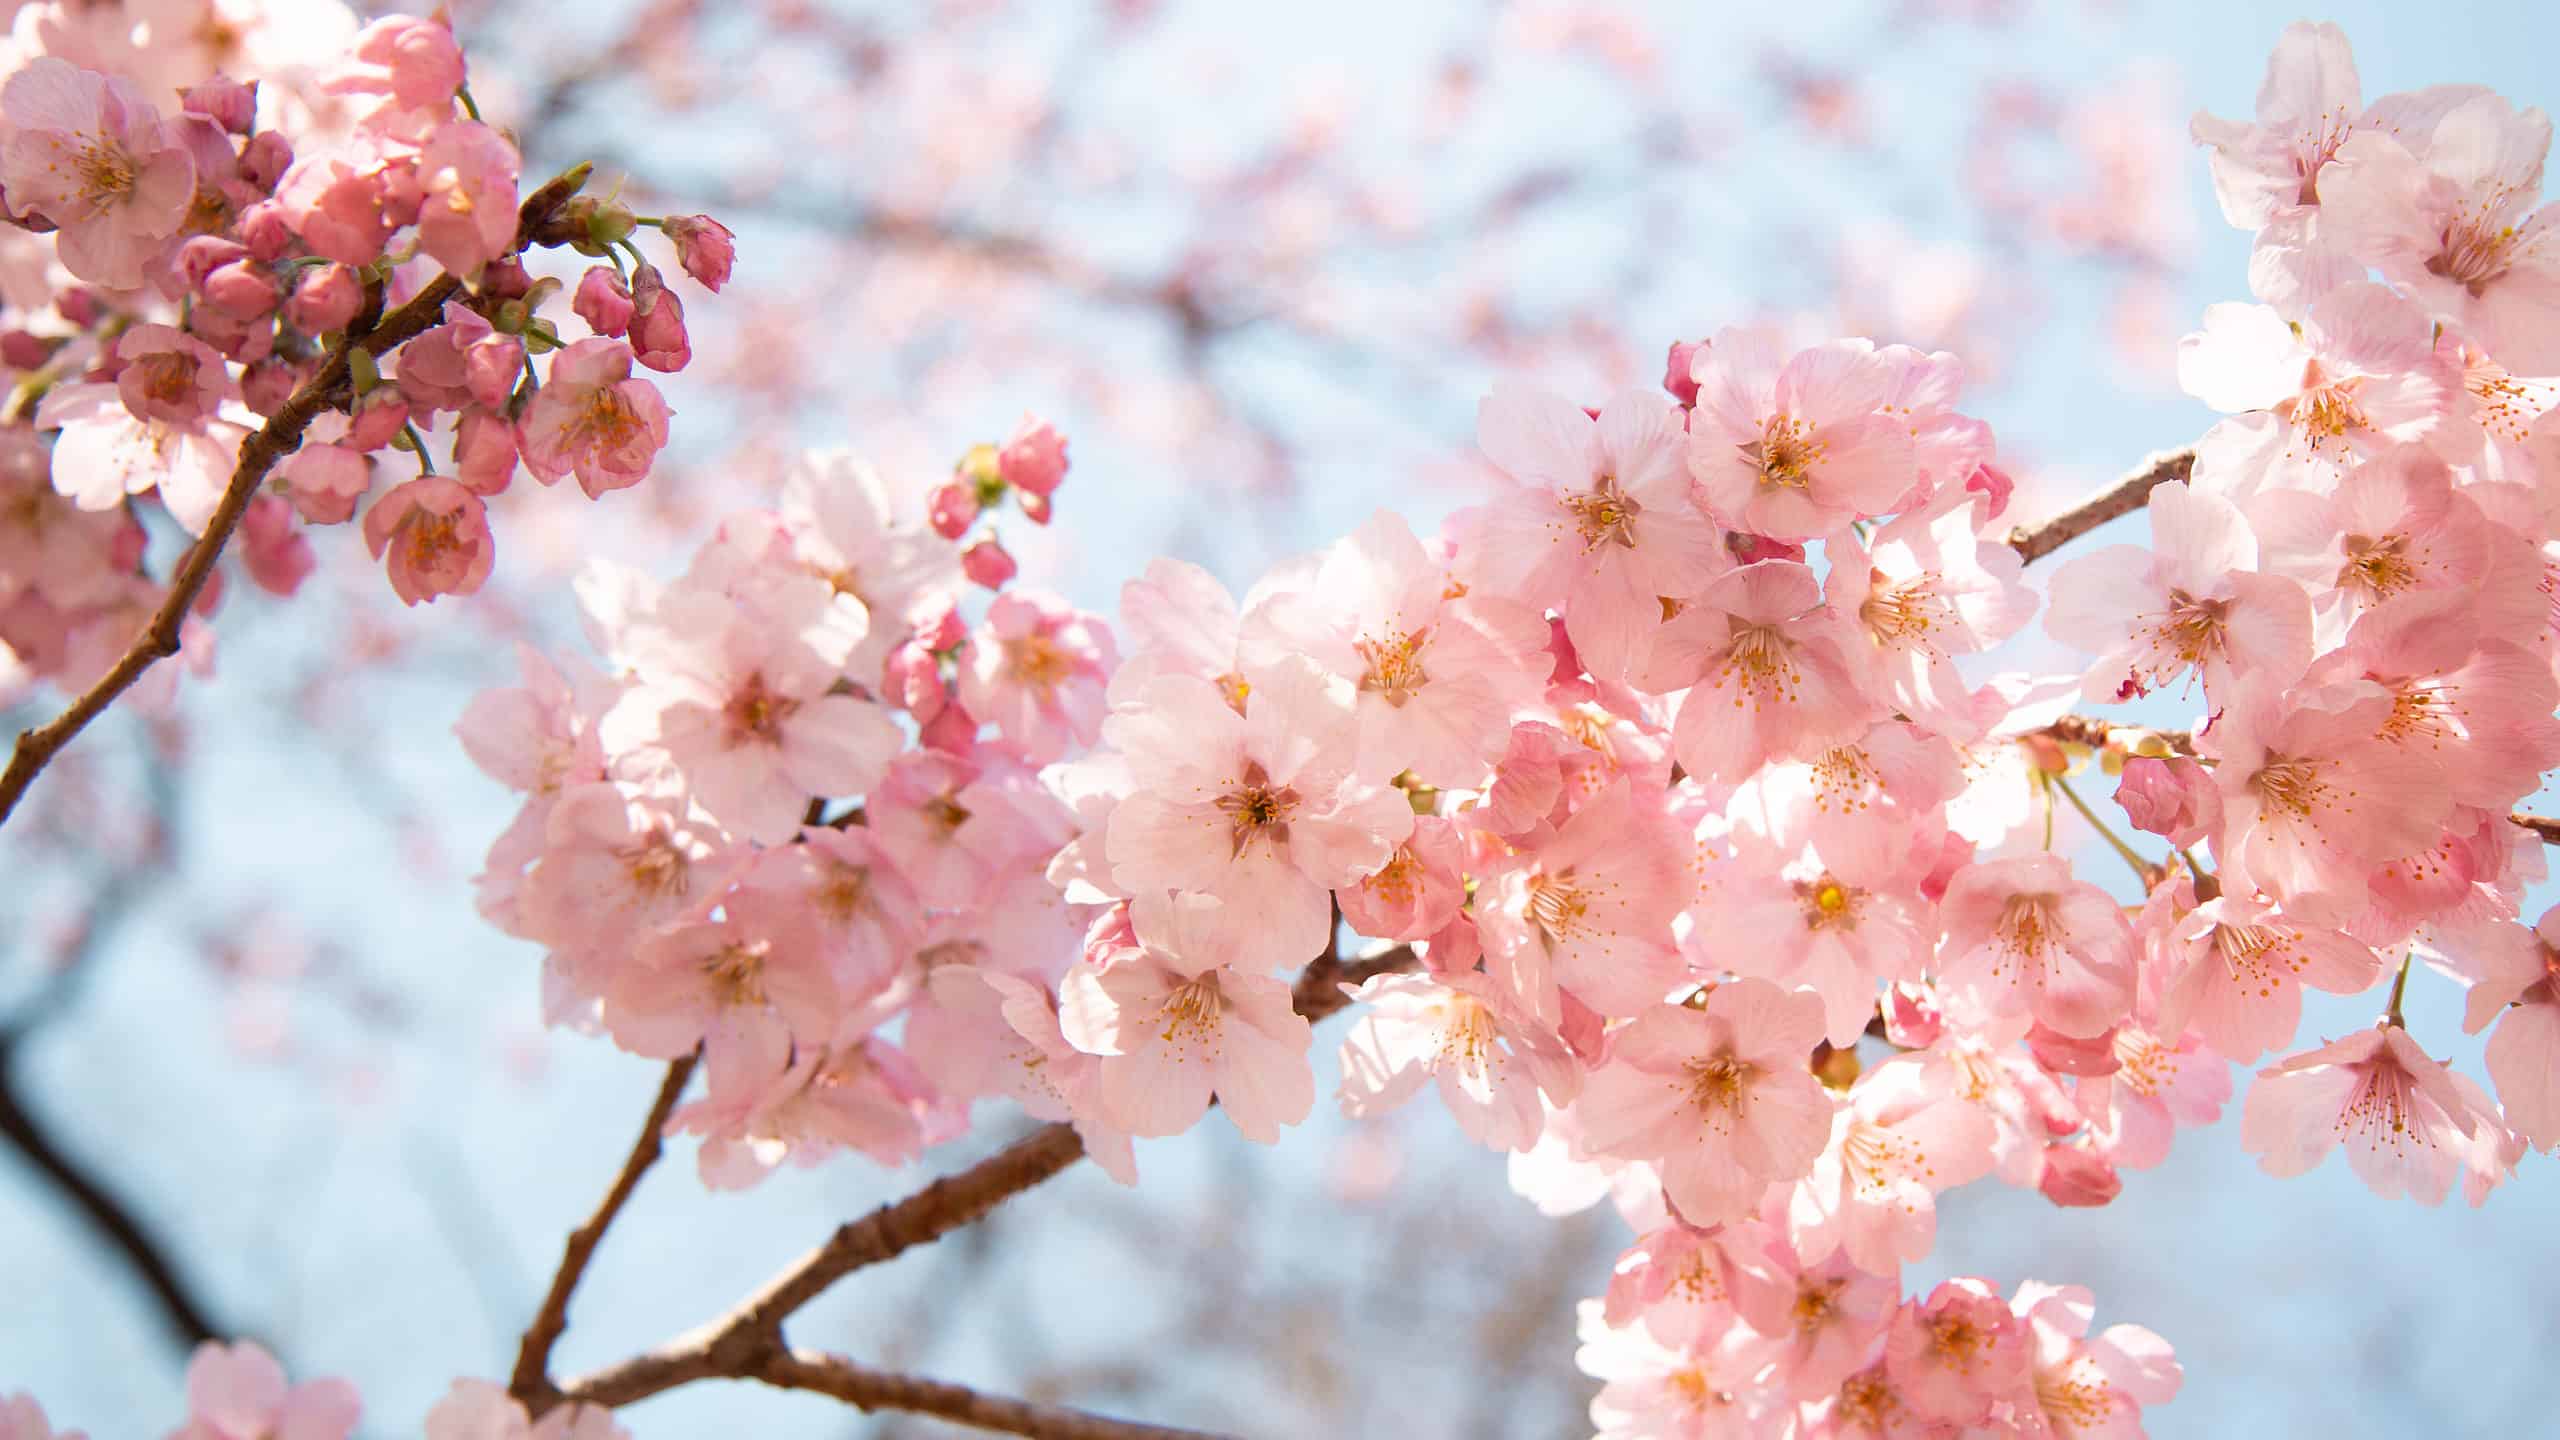 Cherry Blossom Festivals: 17 Places To See The Blooms